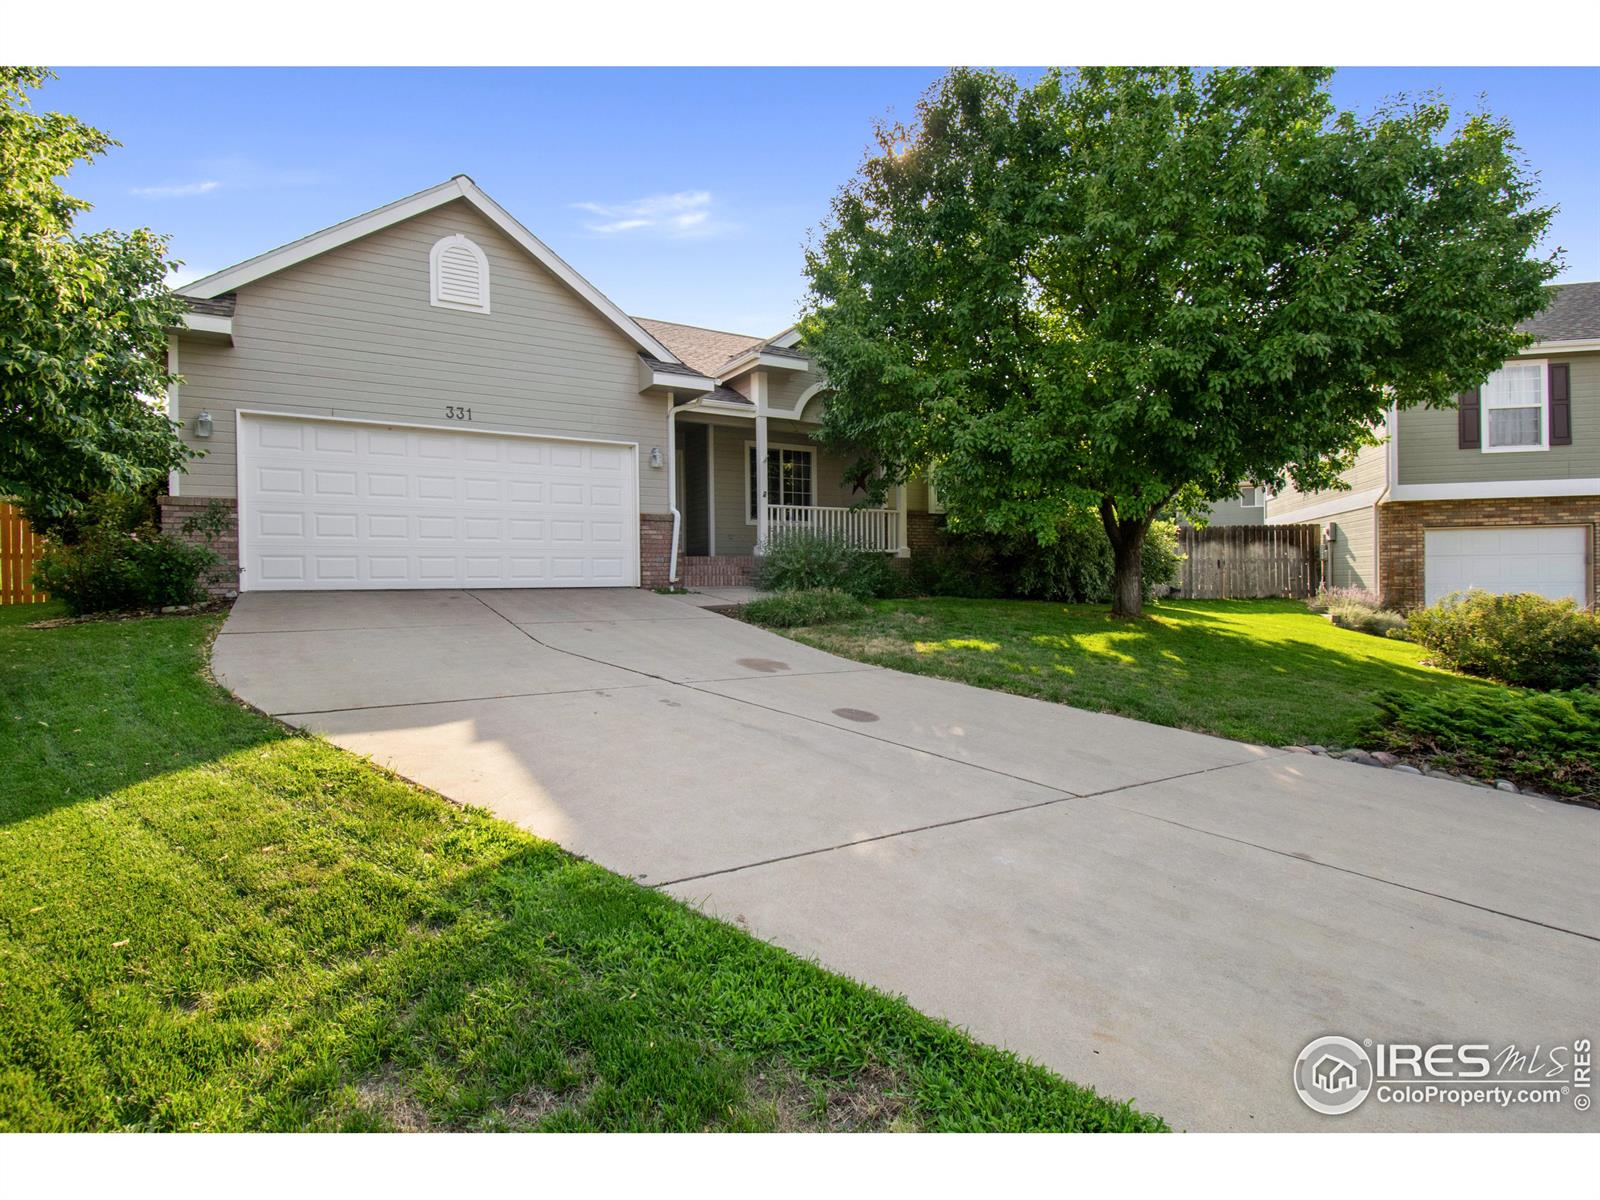 331 52nd, Greeley, CO